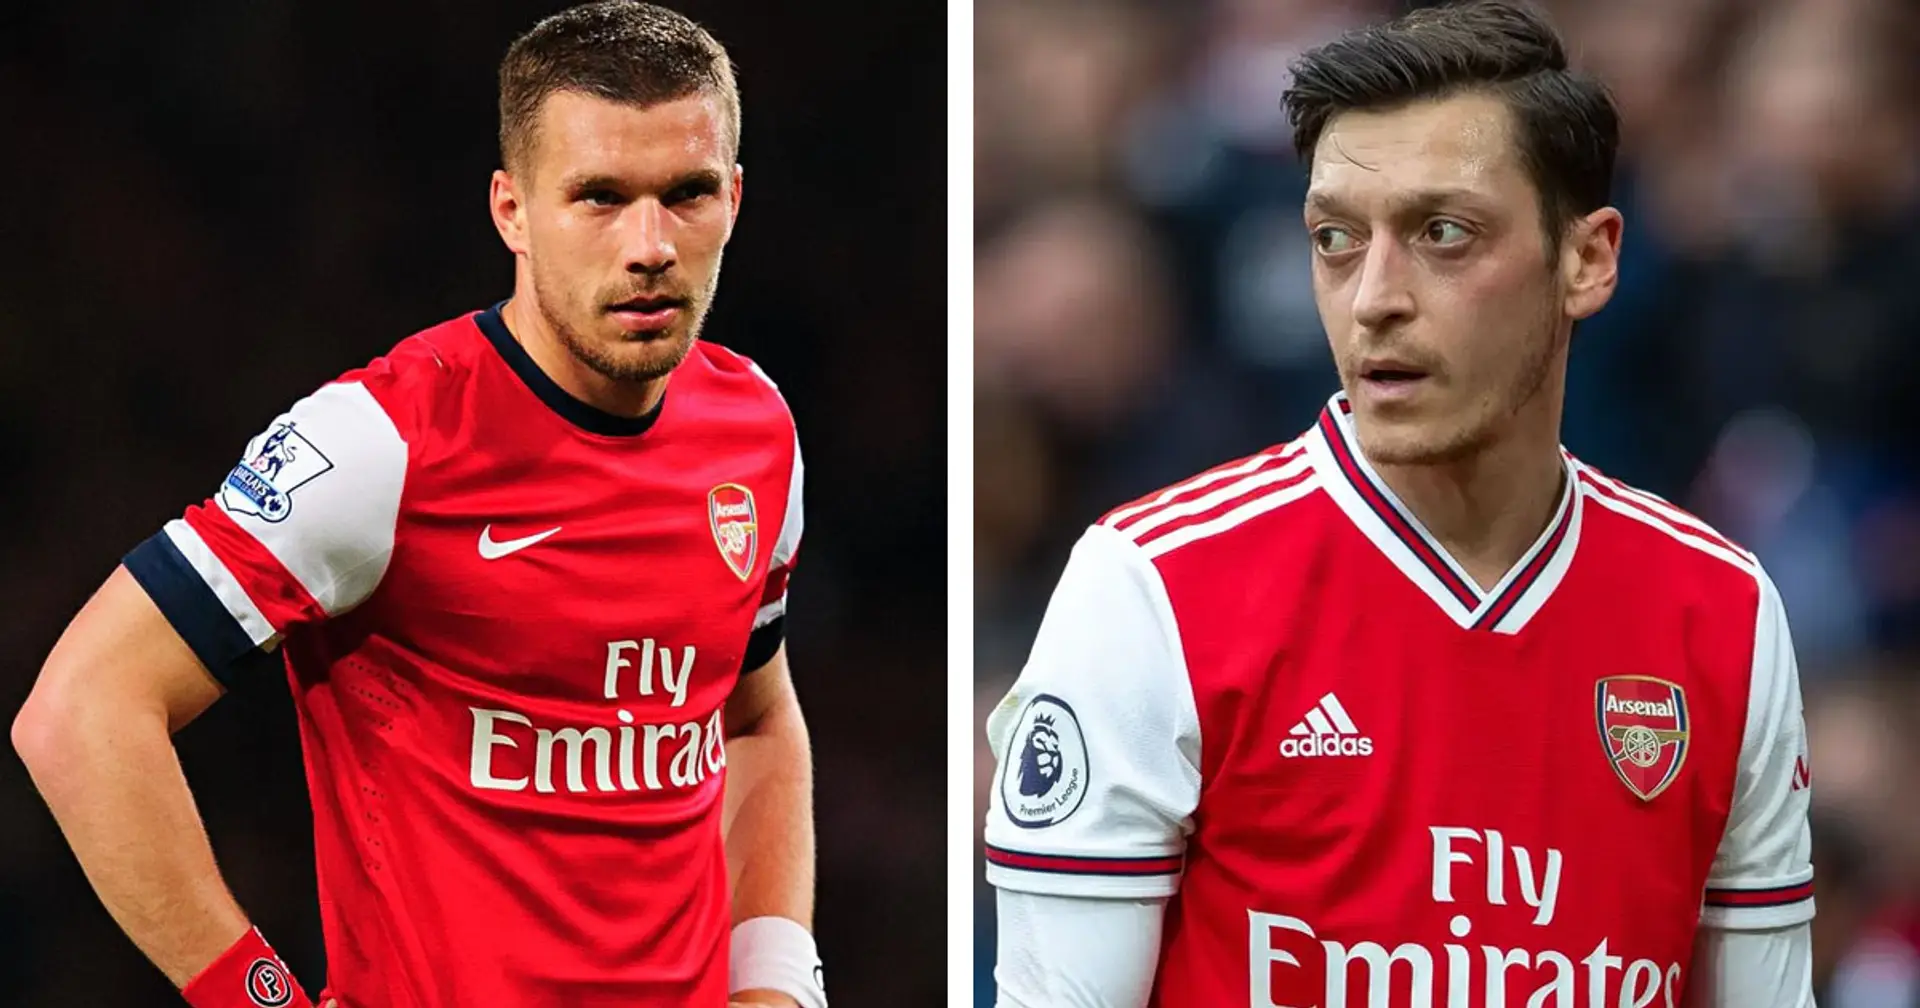 'This project is disgusting and not fair': Ex-Gunners Podolski and Ozil react to Super League announcement